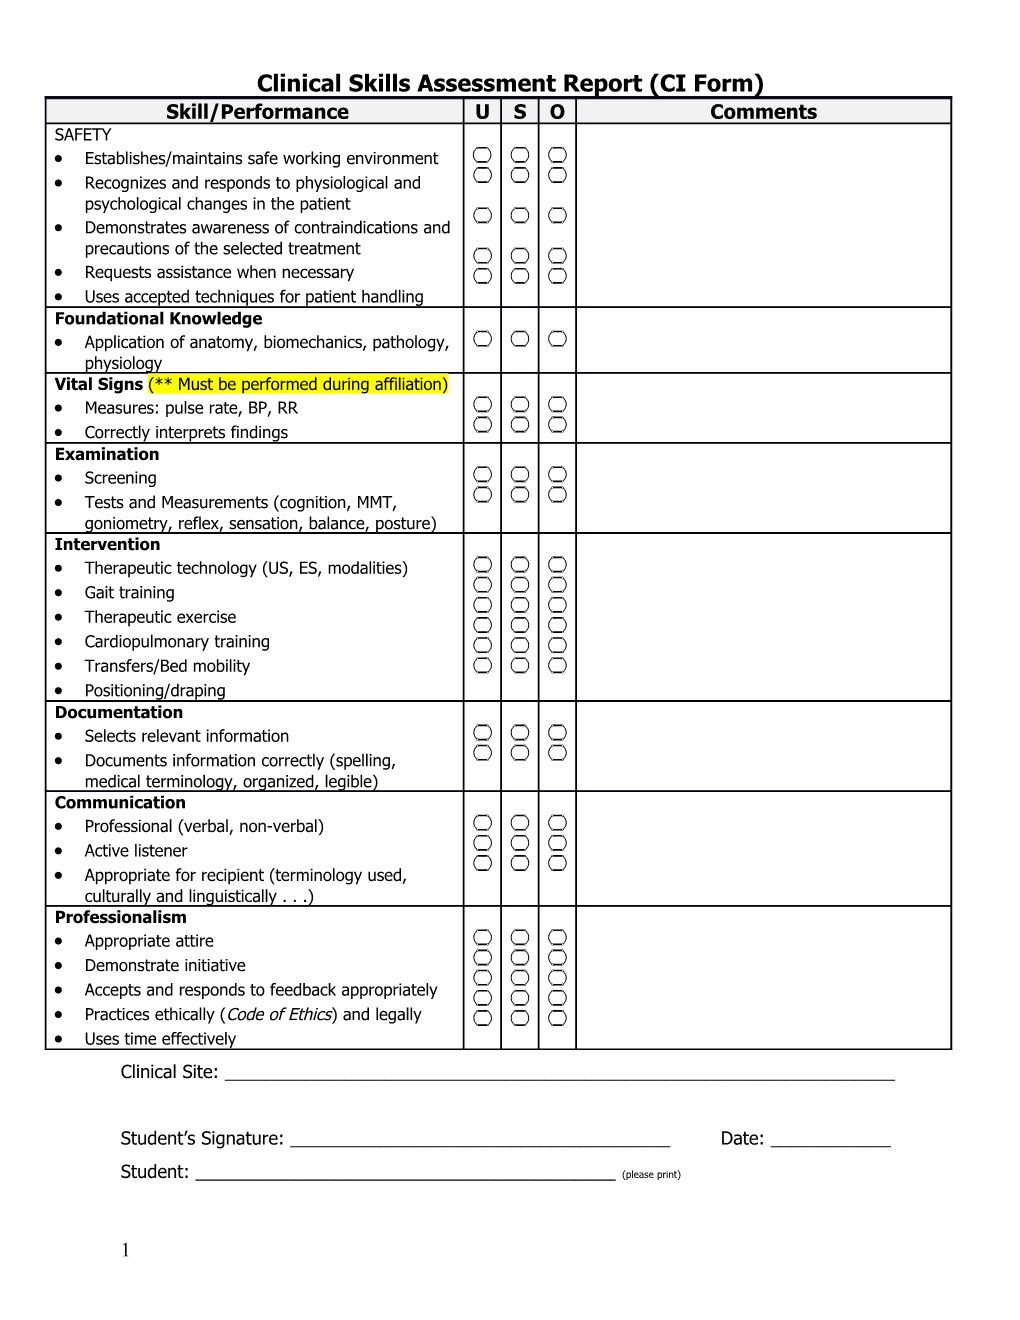 Clinical Skills Assessment Report (CI Form)